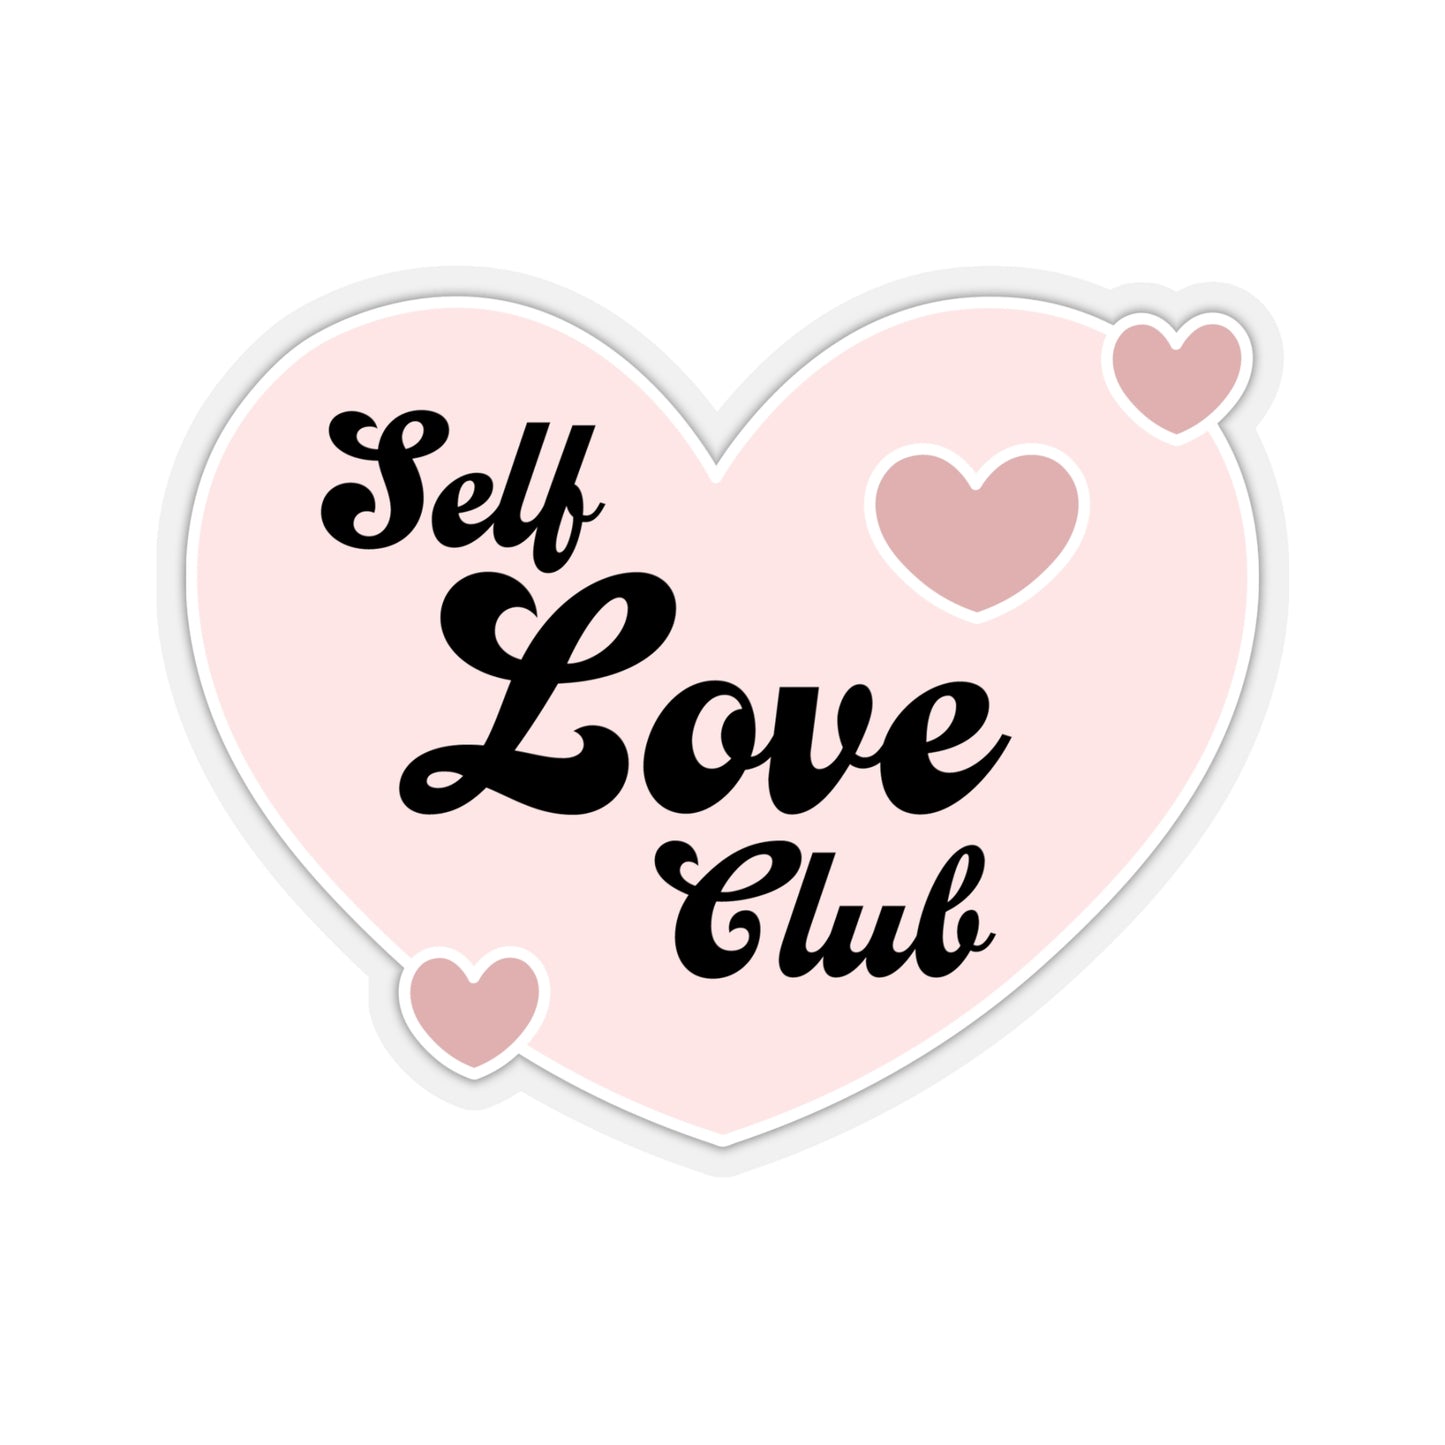 Lovely Kiss-Cut Stickers Valentines Day Self Love Club Decorative Stickers for cards, Scrapbooks, gift tags, or on their own